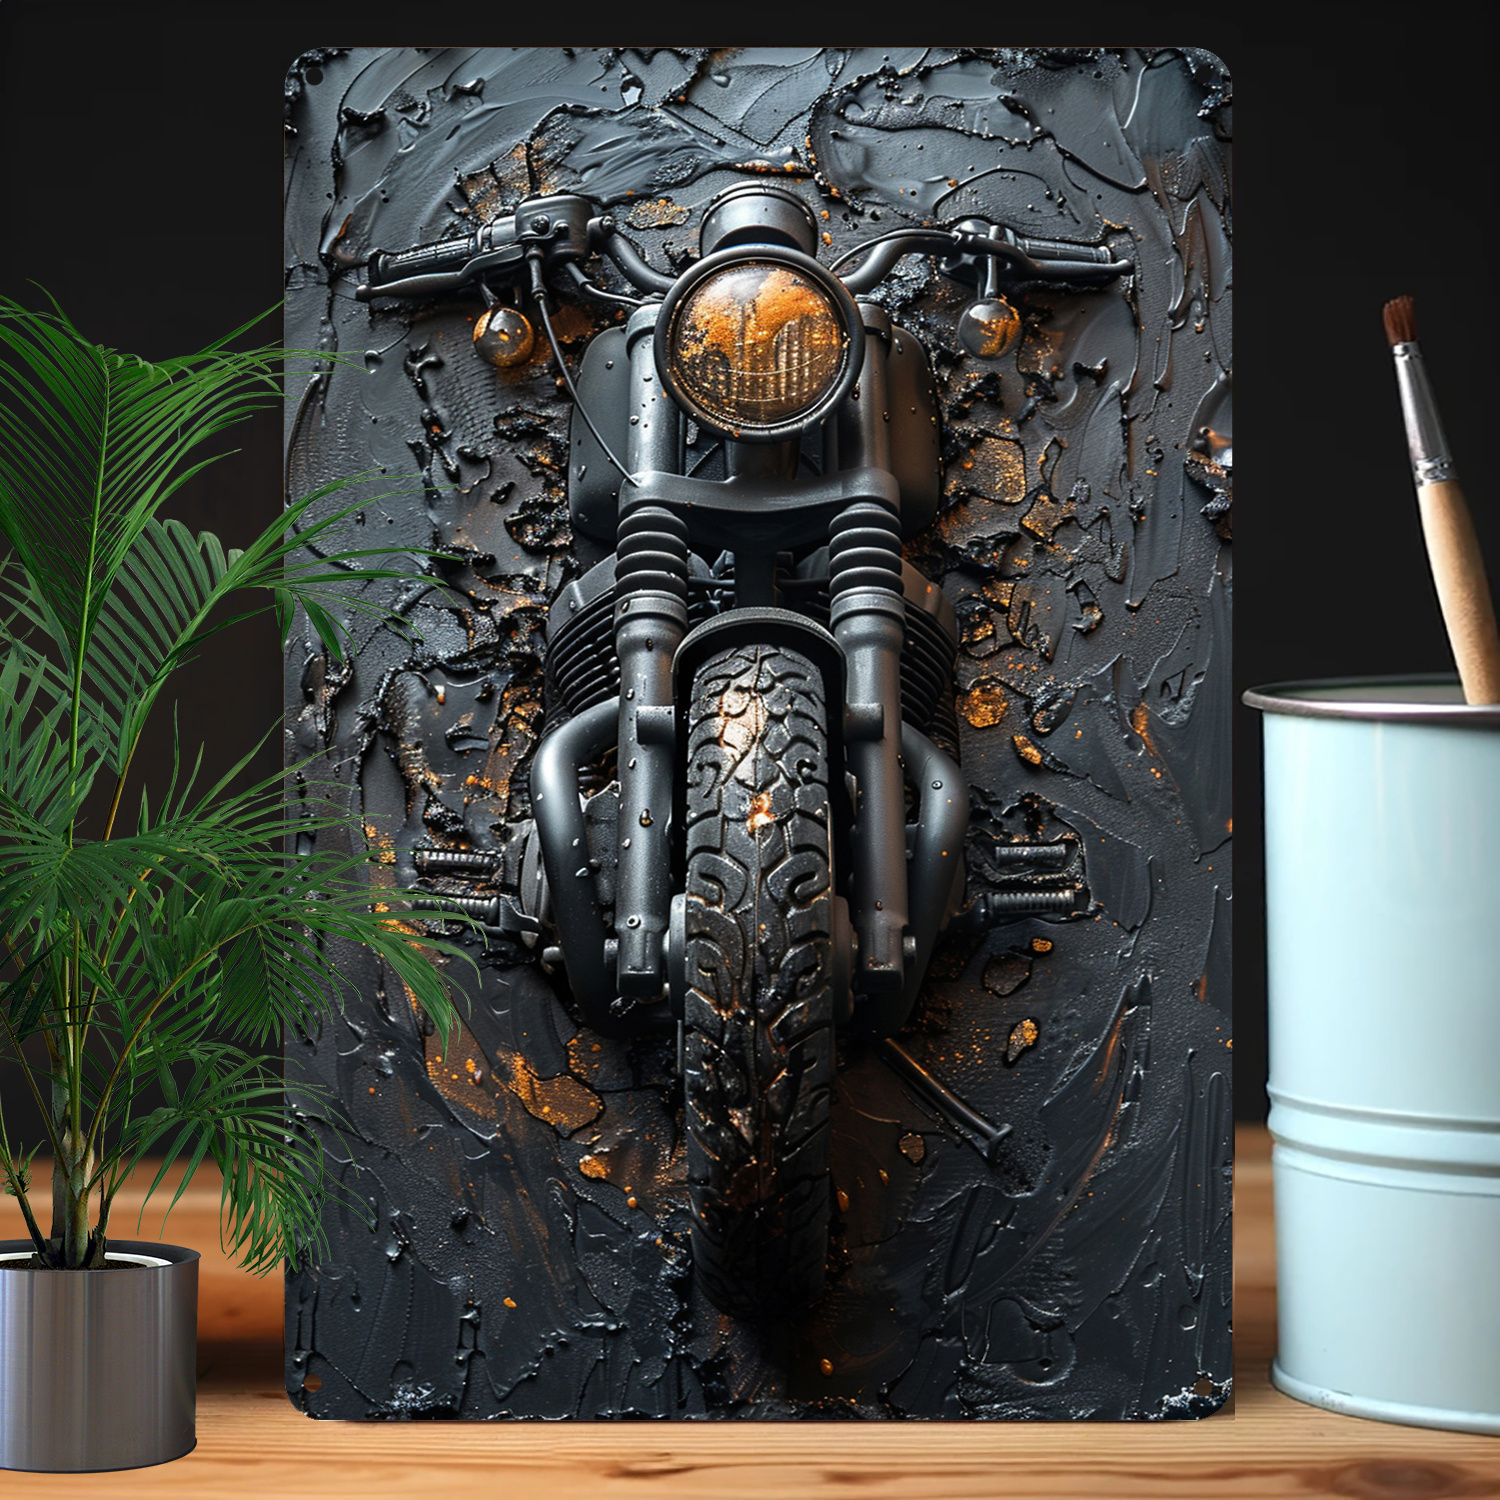 

Motorcycle Embossed Aluminum Wall Art, 8x12 Inch, Durable Metal Decor With 3d Effect, Moisture Resistant For Home, Gym & Office - Vintage Motorcycle Design, Gift For Dad, Unique Decor A2851